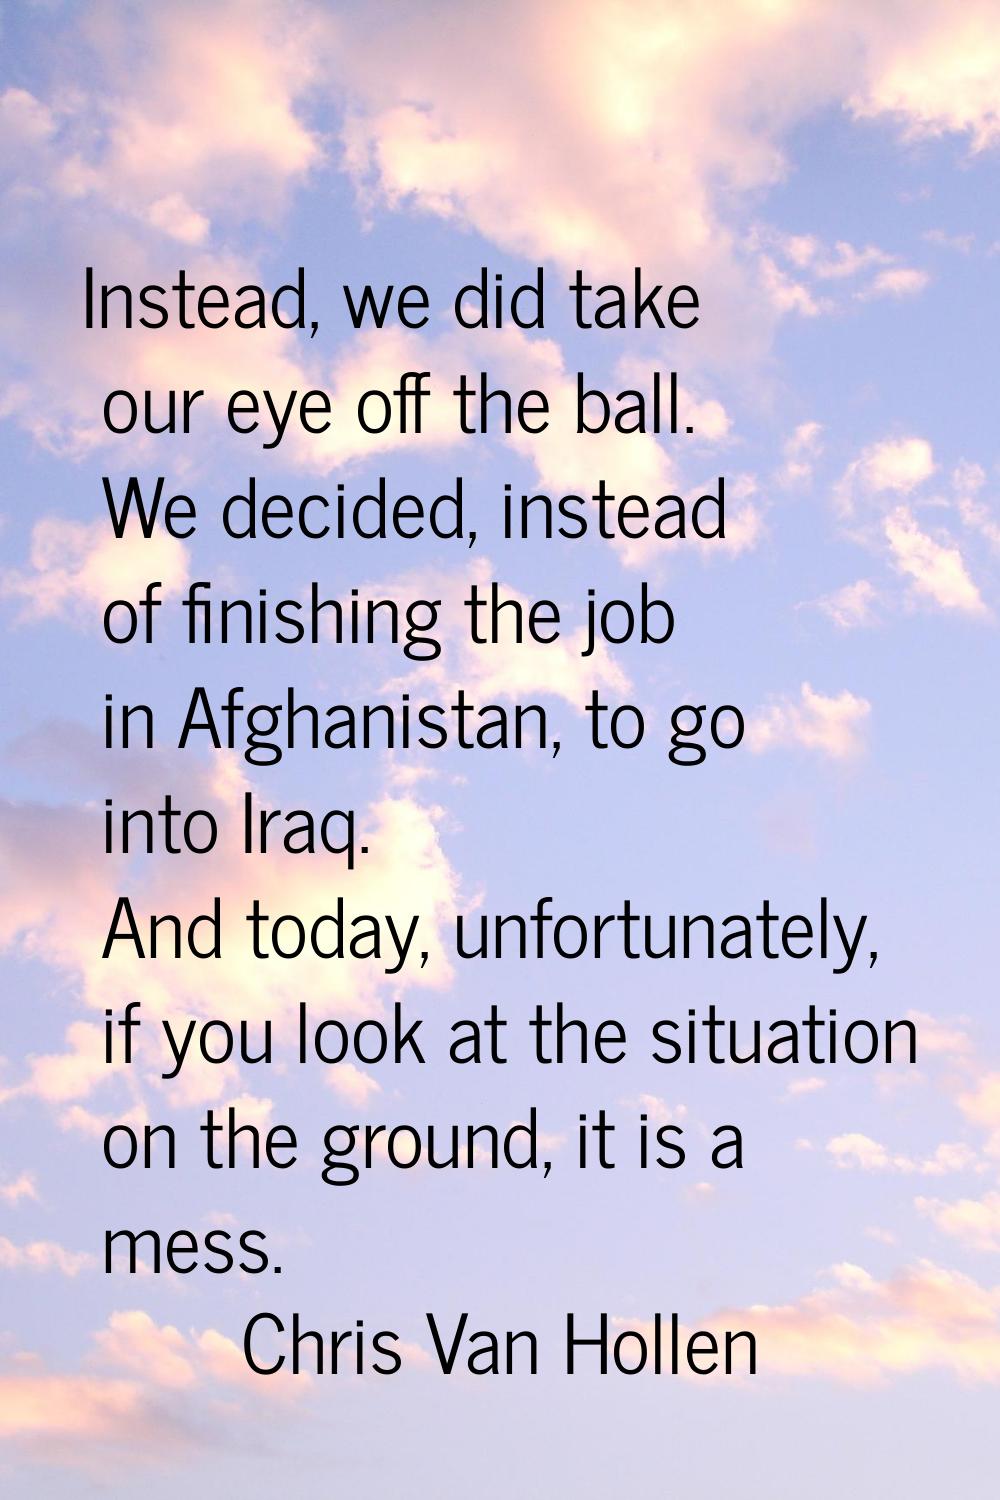 Instead, we did take our eye off the ball. We decided, instead of finishing the job in Afghanistan,